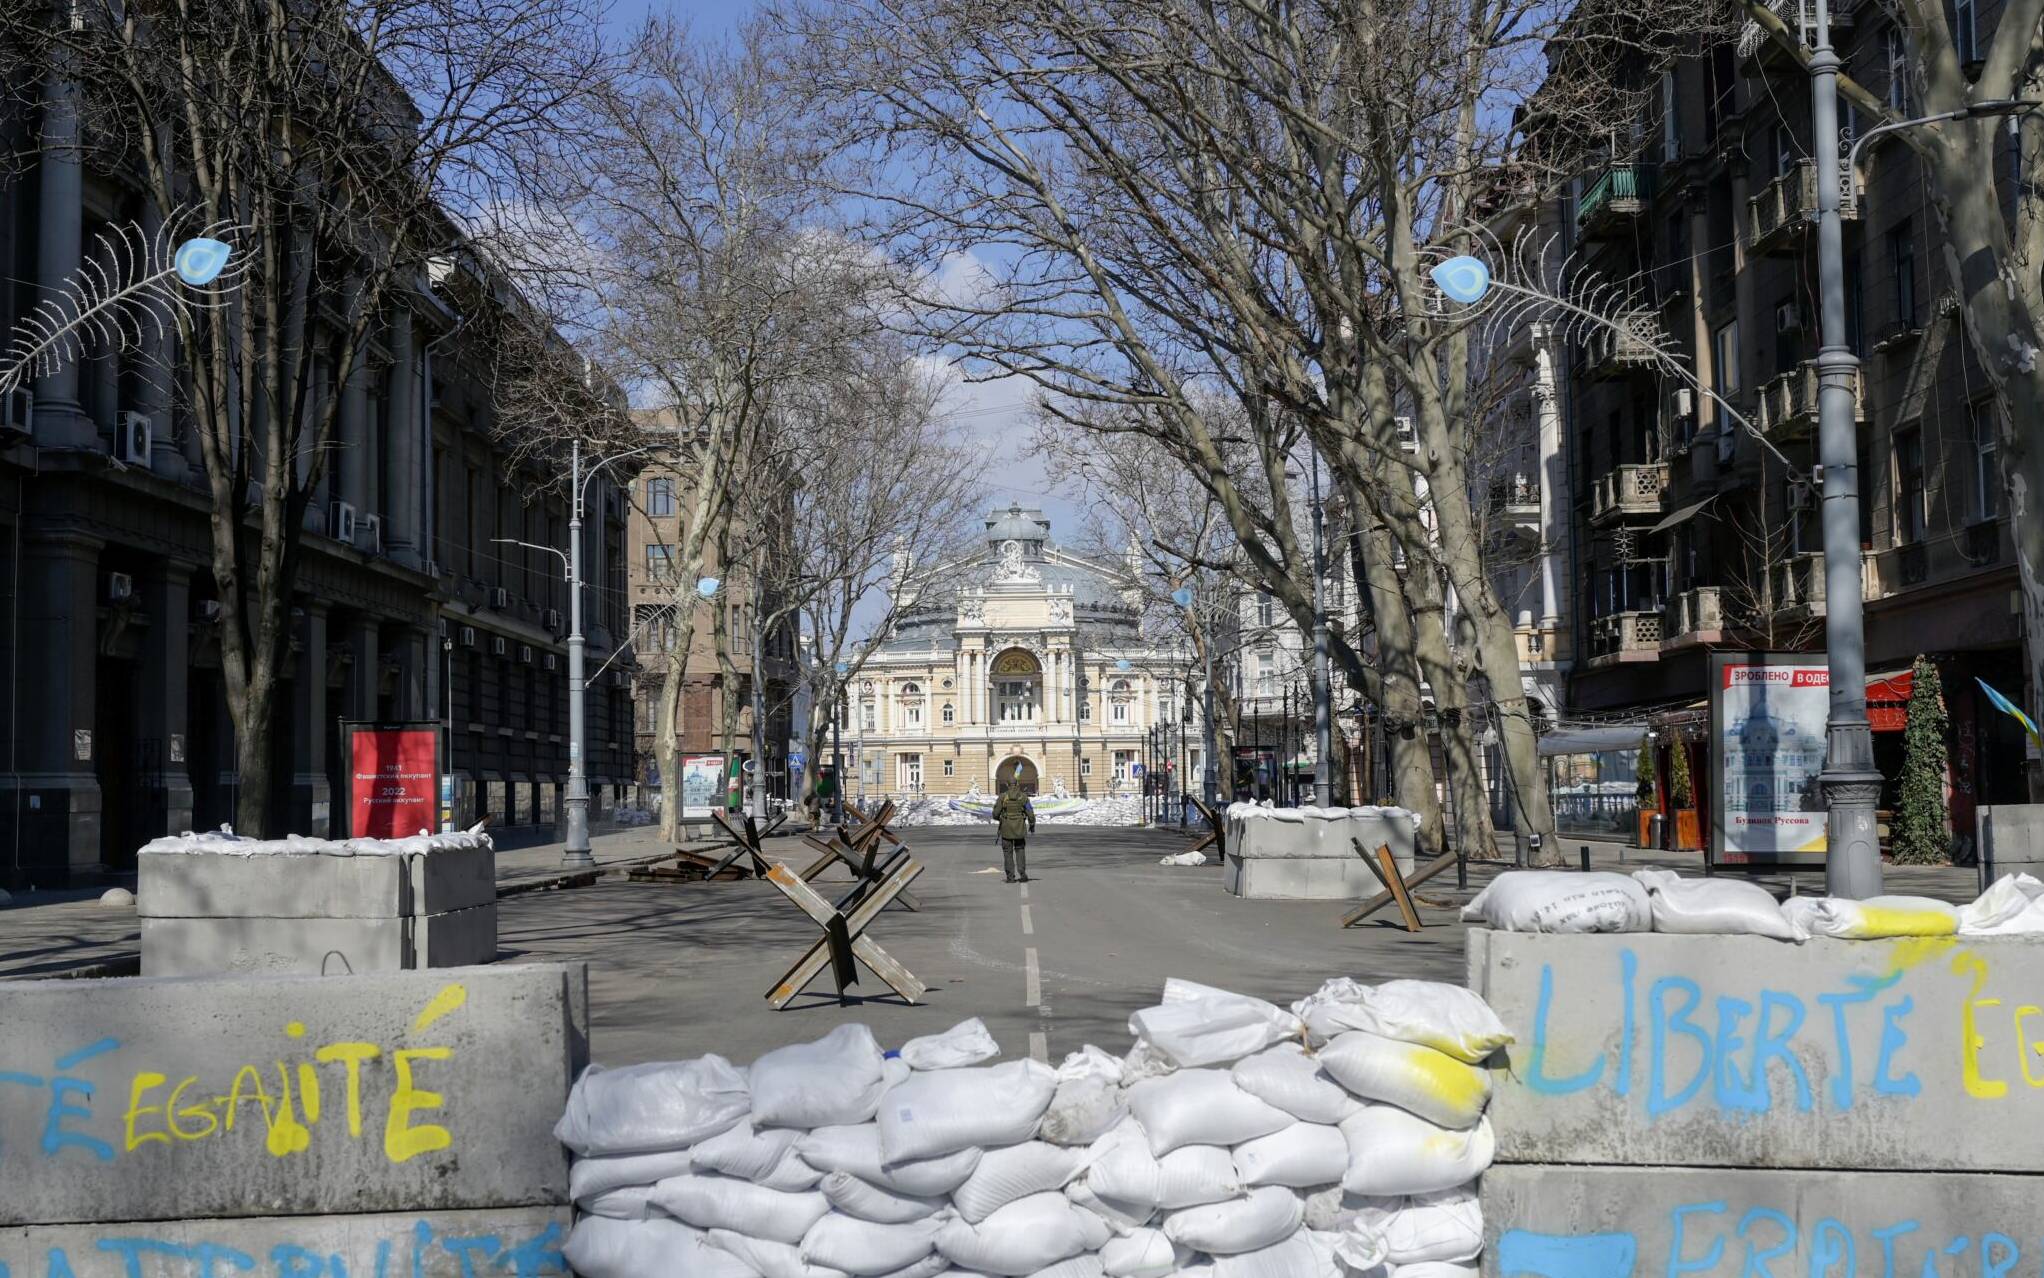 Concrete blocks with French national motto "liberty, equality, fraternity" written on it 
form a barricade in front of the National Academic Theater of Opera and Ballet in Odessa on March 17, 2022. - Odessa, which Ukraine fears could be the next target of Russia's offensive in the south, is the country's main port and is vital for its economy. But the city of one million people close to the Romanian and Moldovan borders also holds a special place in the Russian imagination. (Photo by BULENT KILIC / AFP)